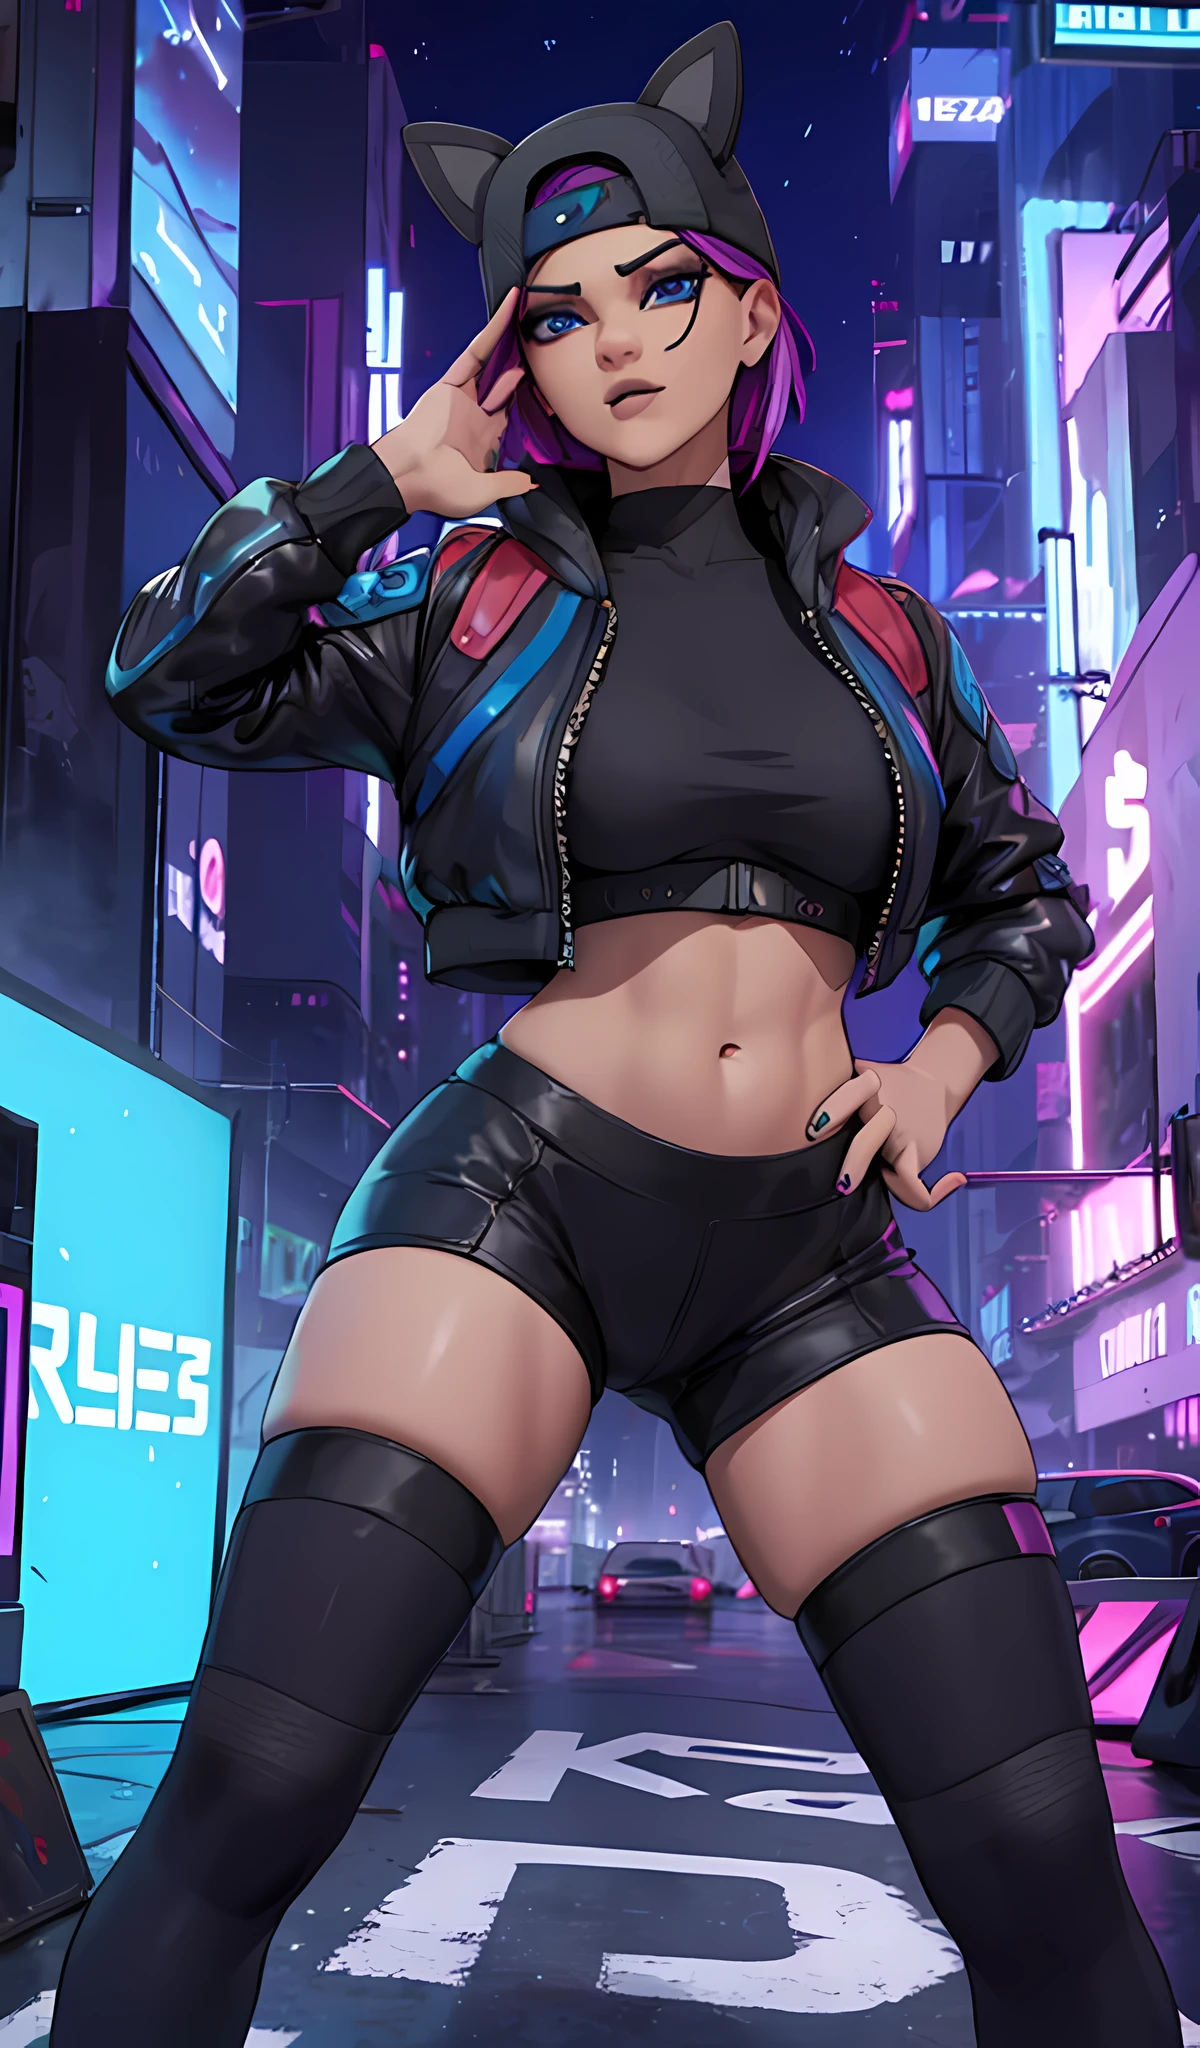 1 girl, sitting, cyberpunk night, blue jacket, black jogger, extremely detailed, Detailed face ,cap ,pies ,hermoso Detailed face, detailed eyes, dynamic pose 